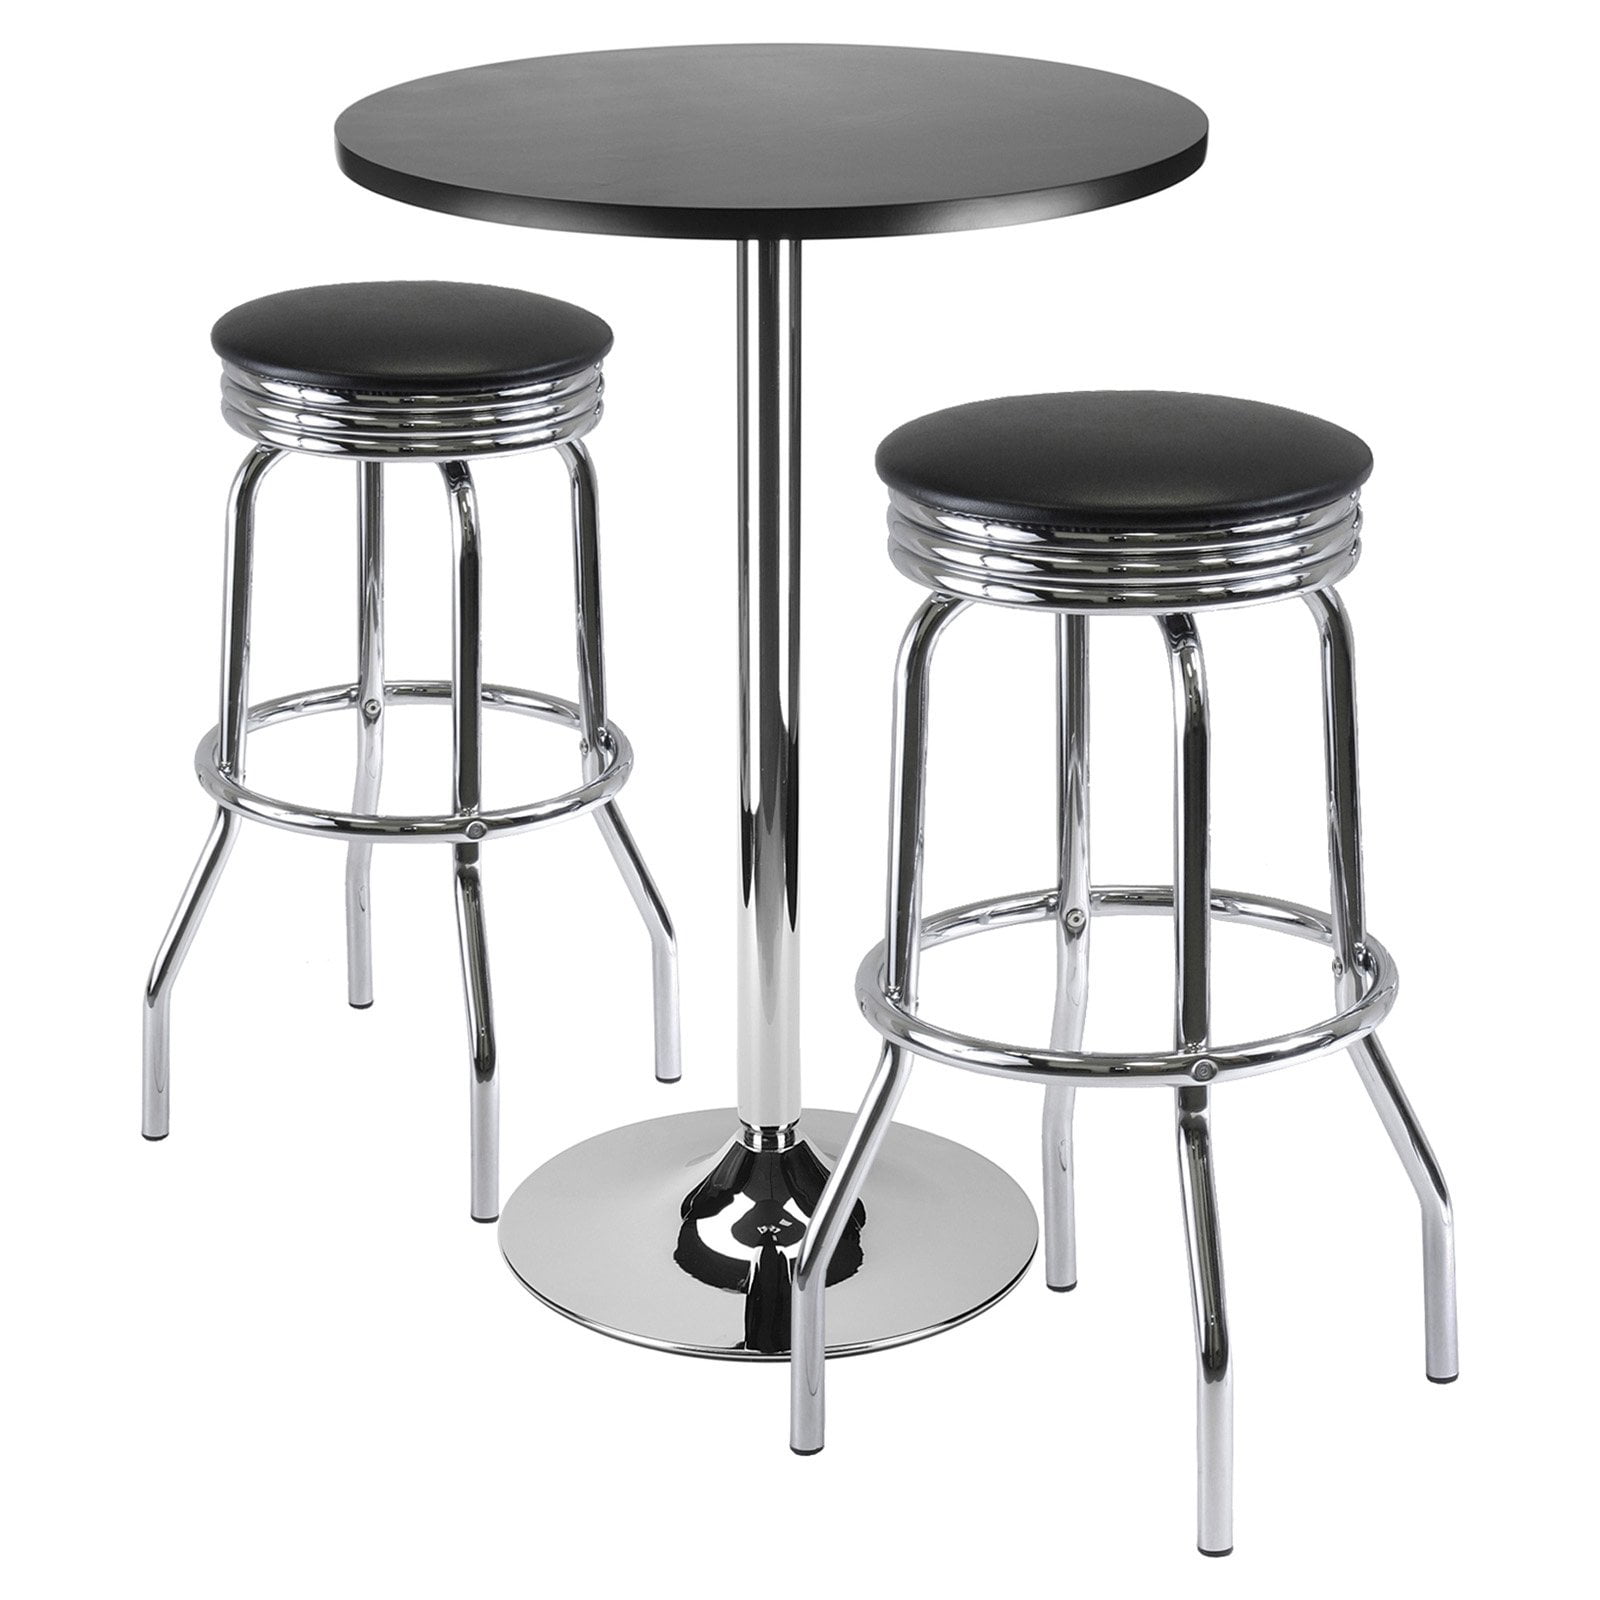 Details about   3 Piece 50's Retro Soda Fountain Round Bar Table and Stool Set Chrome and Glossy 